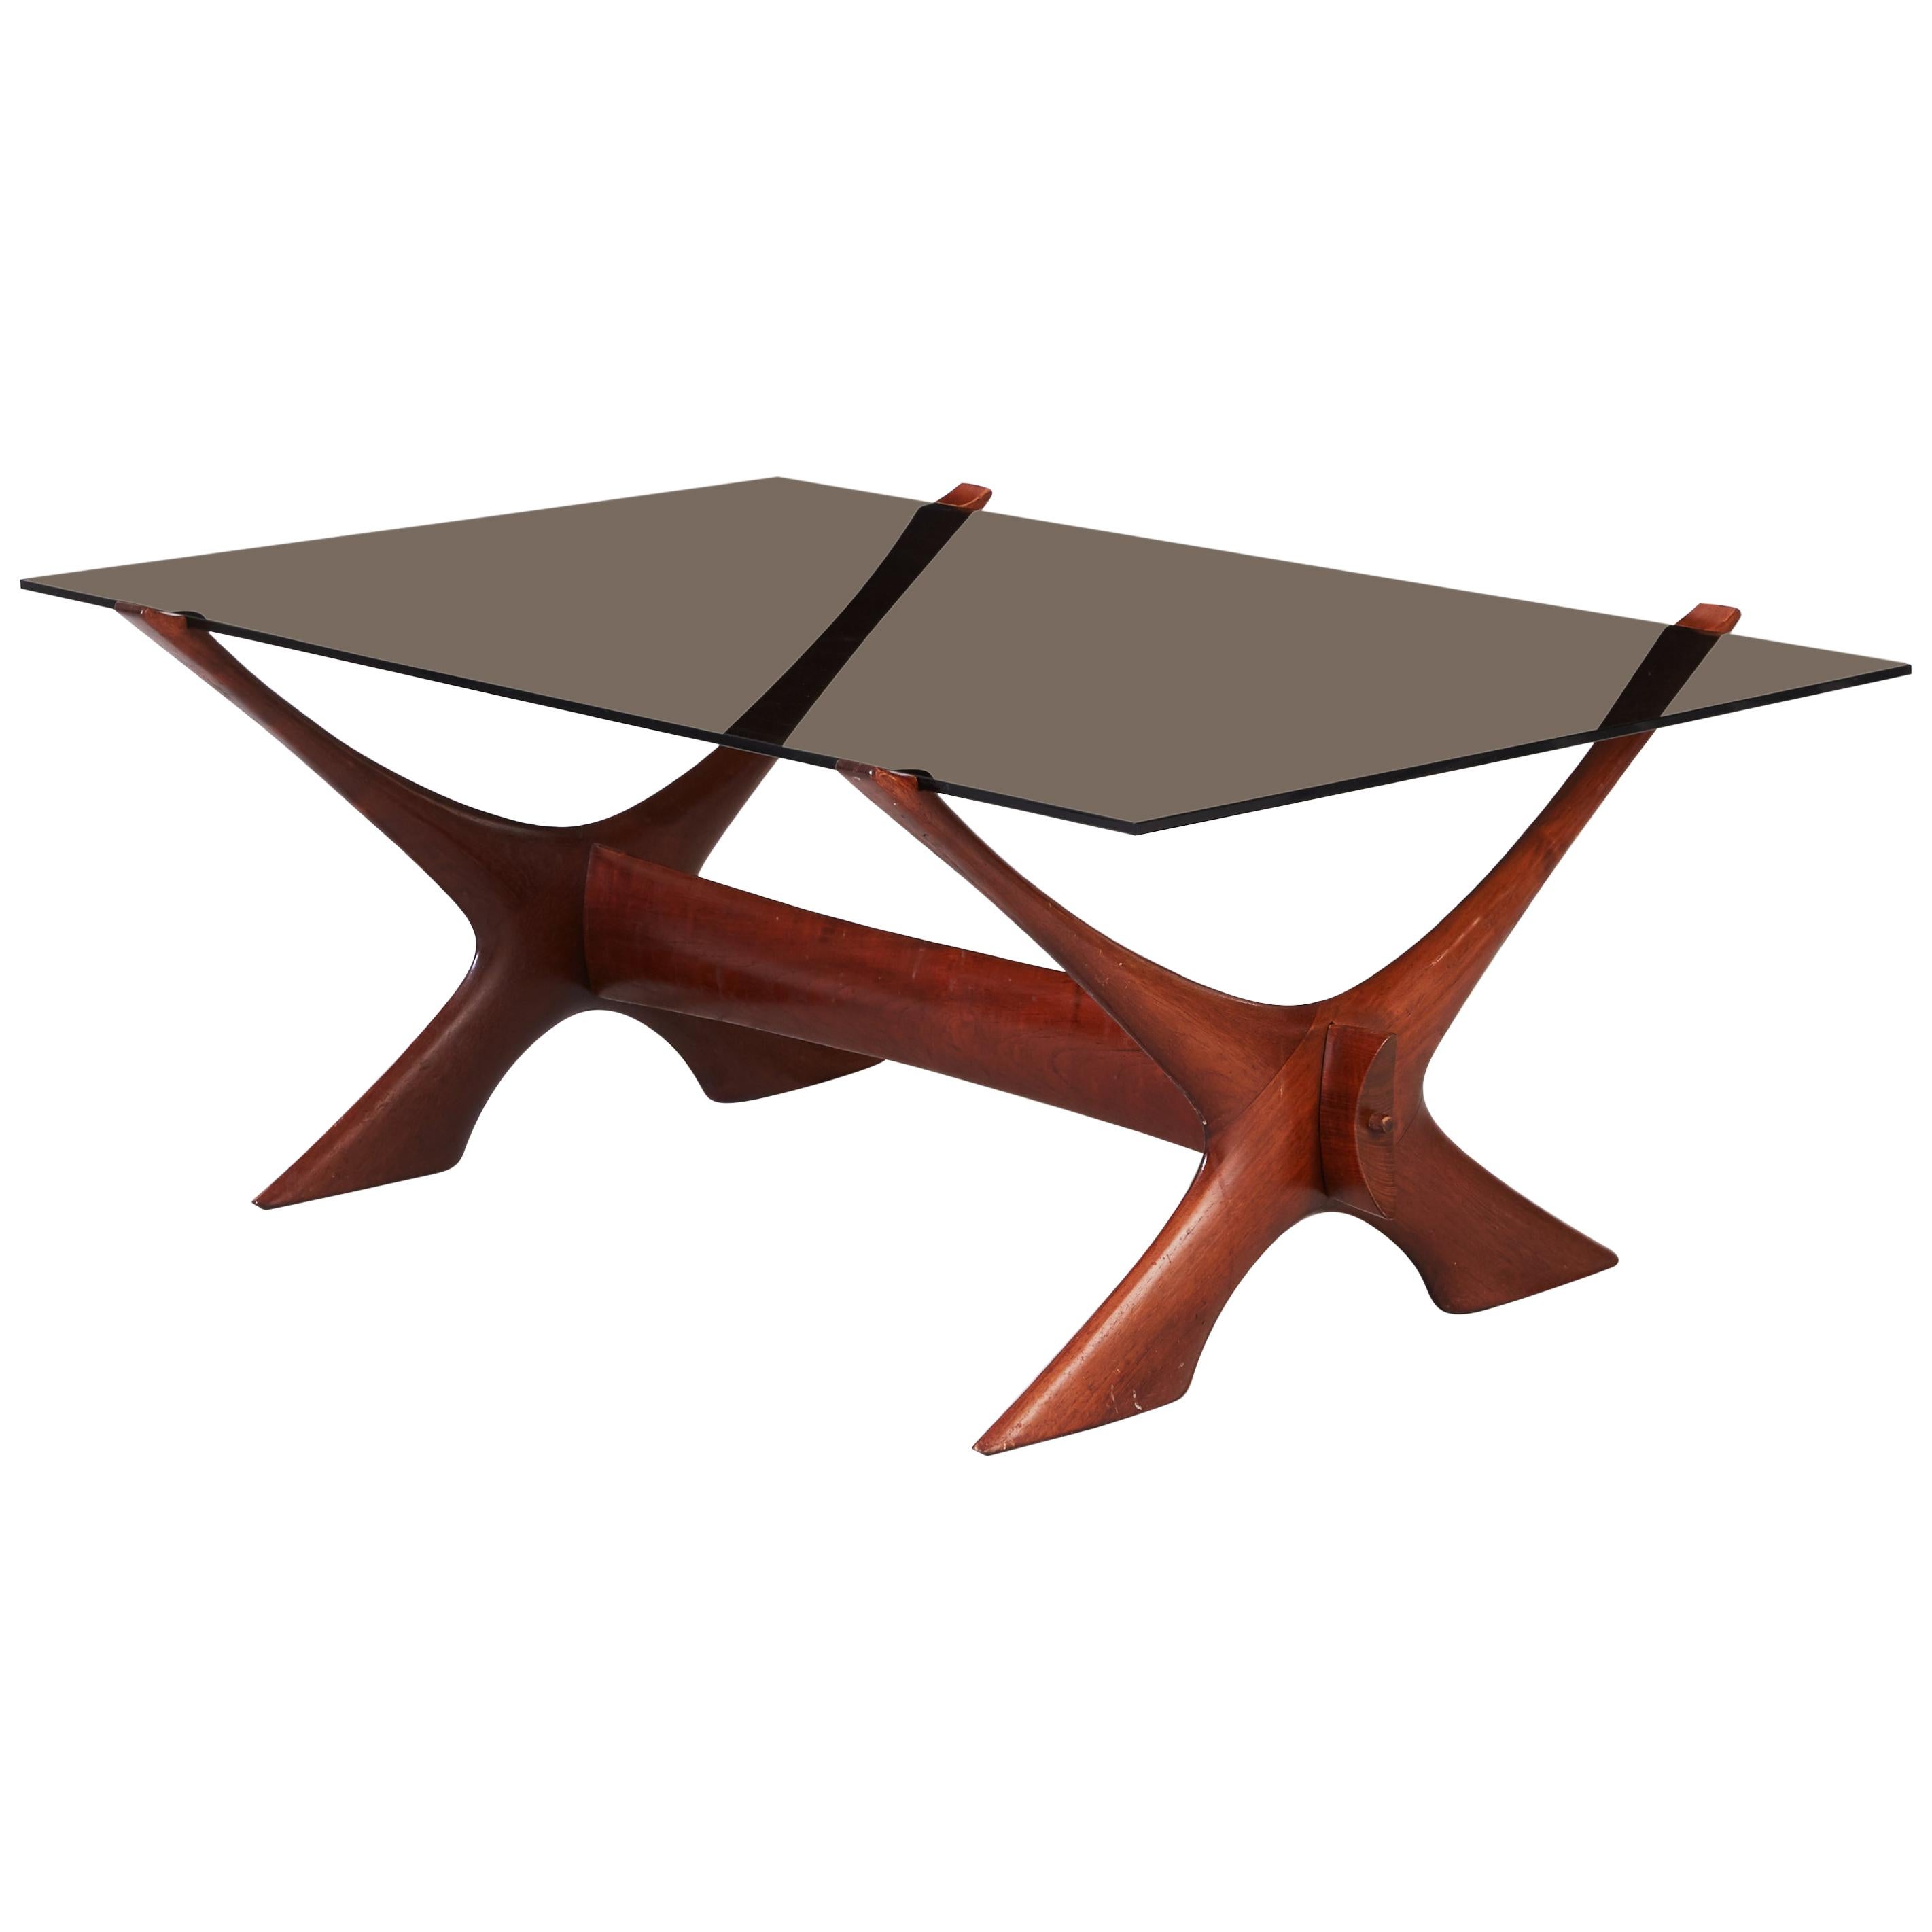 Teak and Glass "Condor" Coffee Table by Fredrik Schriever Abeln, 1960s